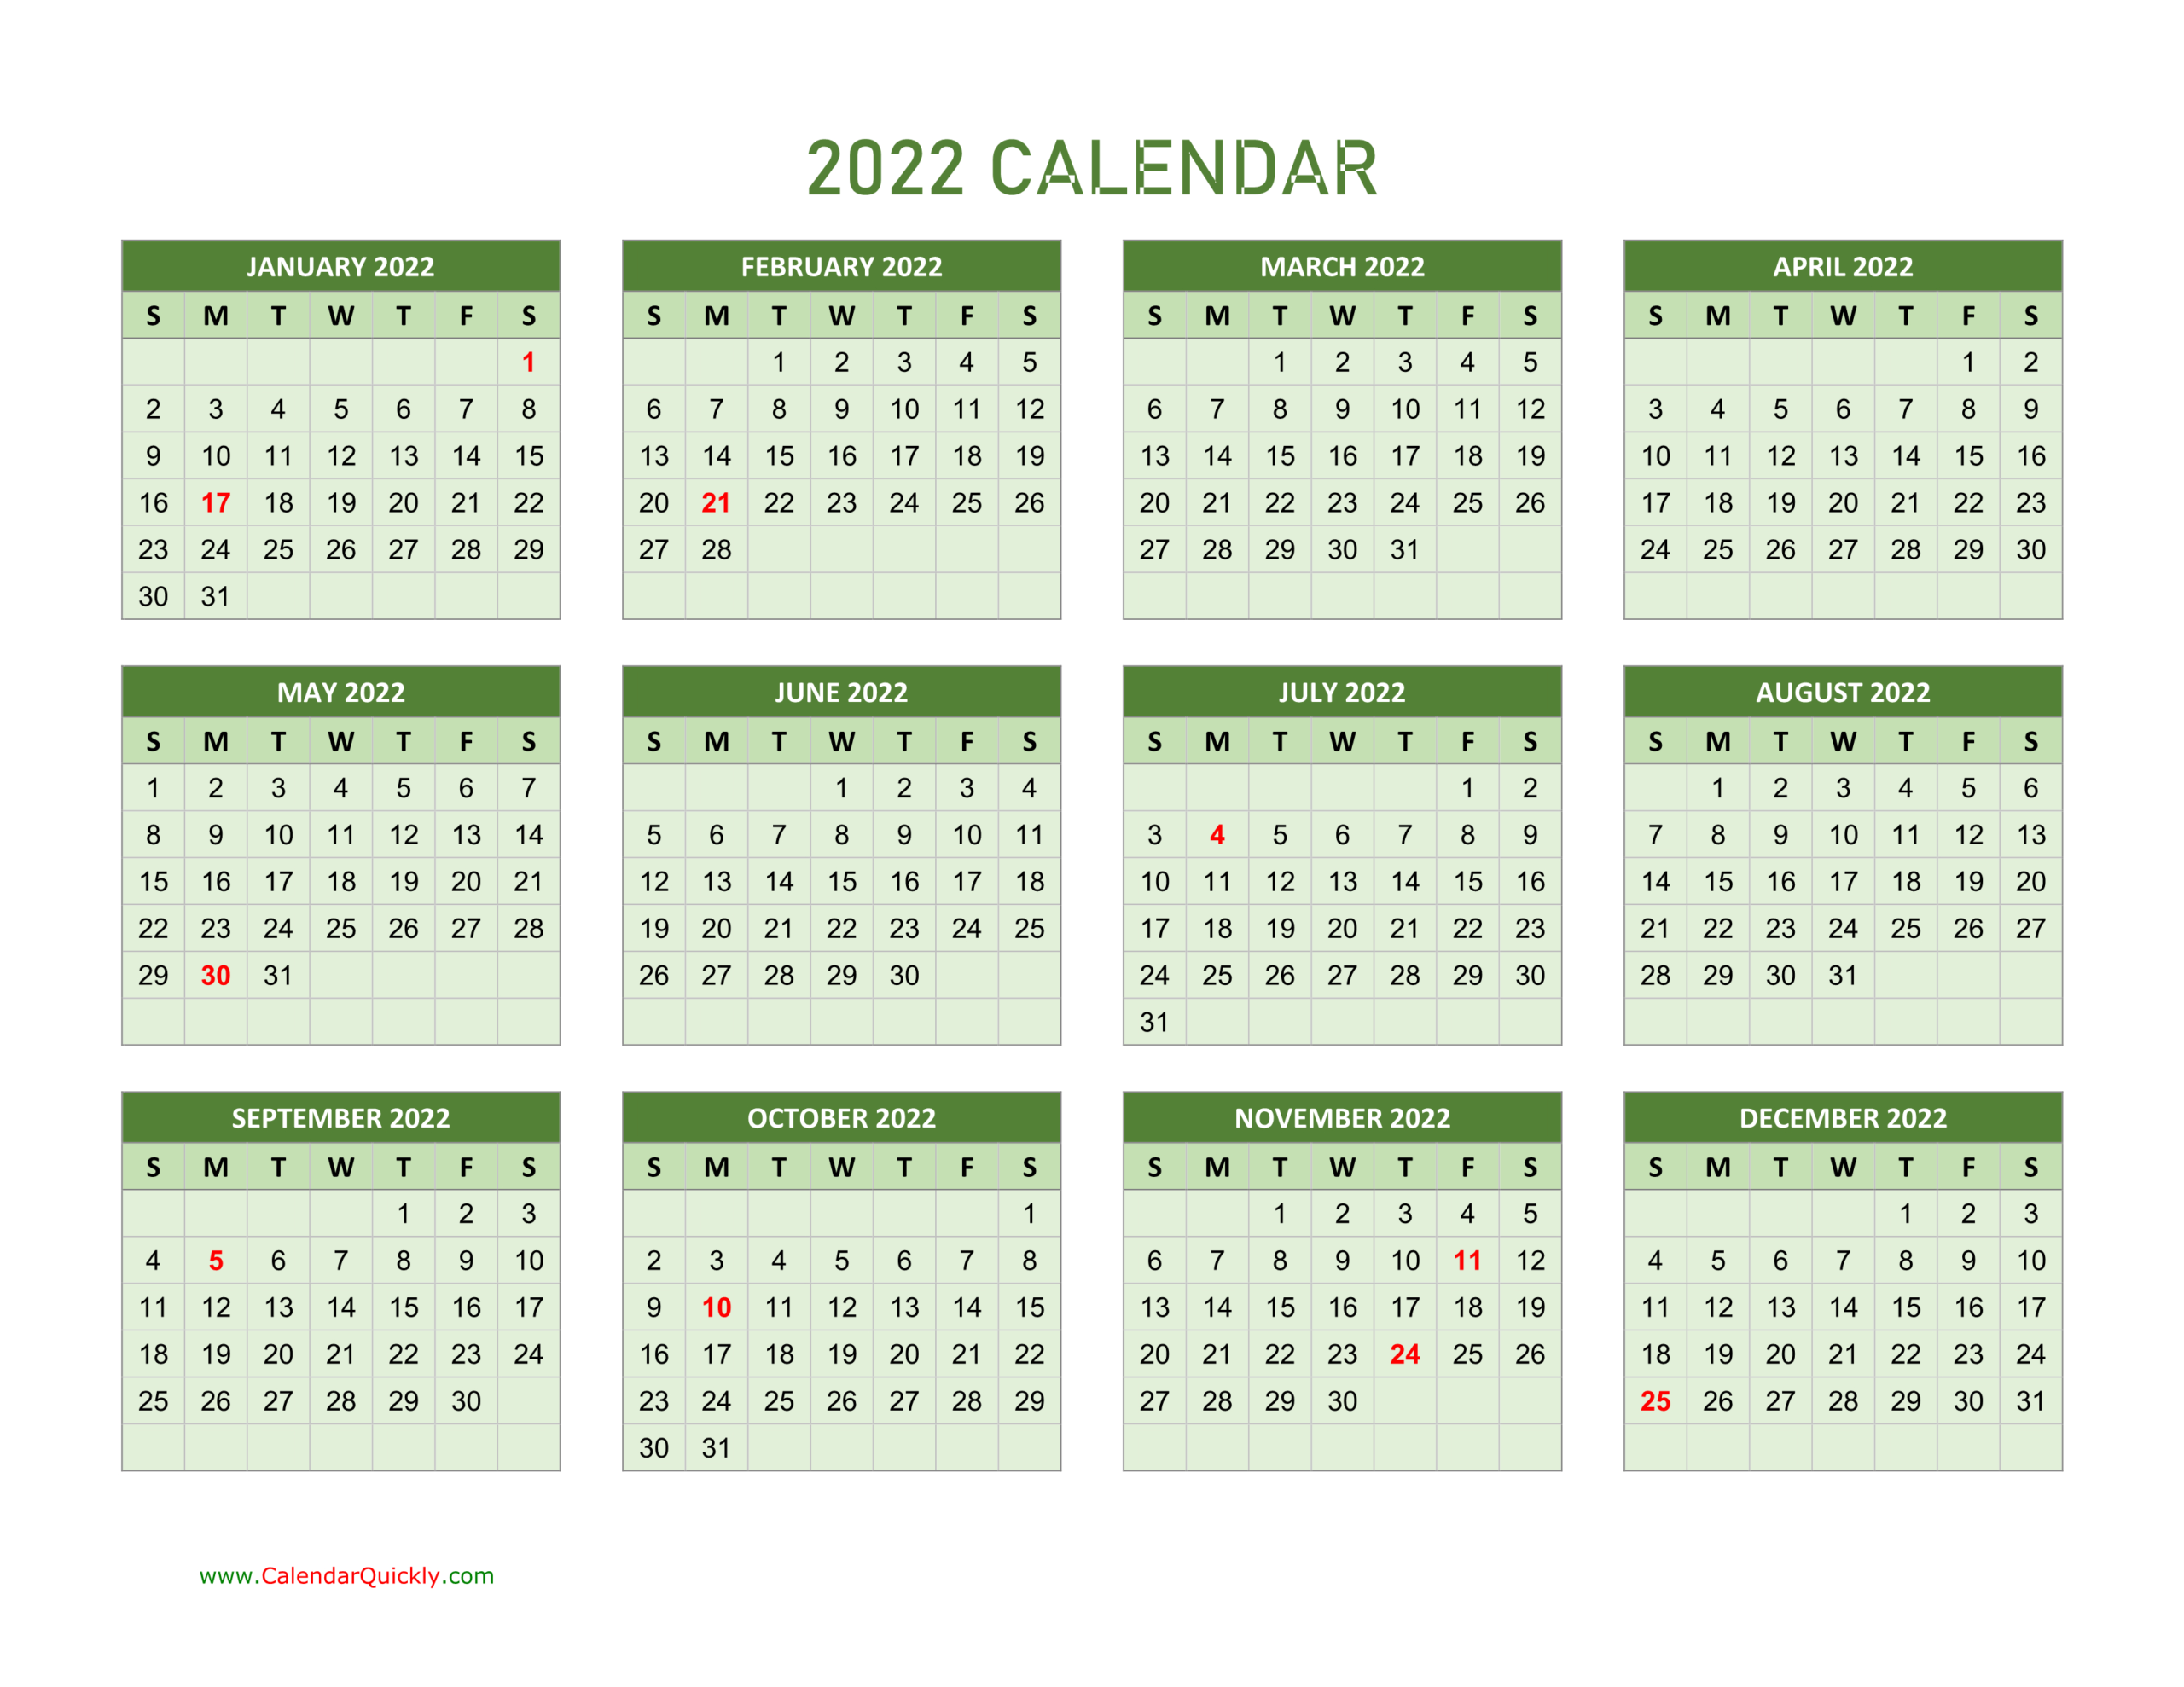 Yearly Calendar 2022 | Calendar Quickly  2022 Yearly Free Printable 2022 Calendar On One Page